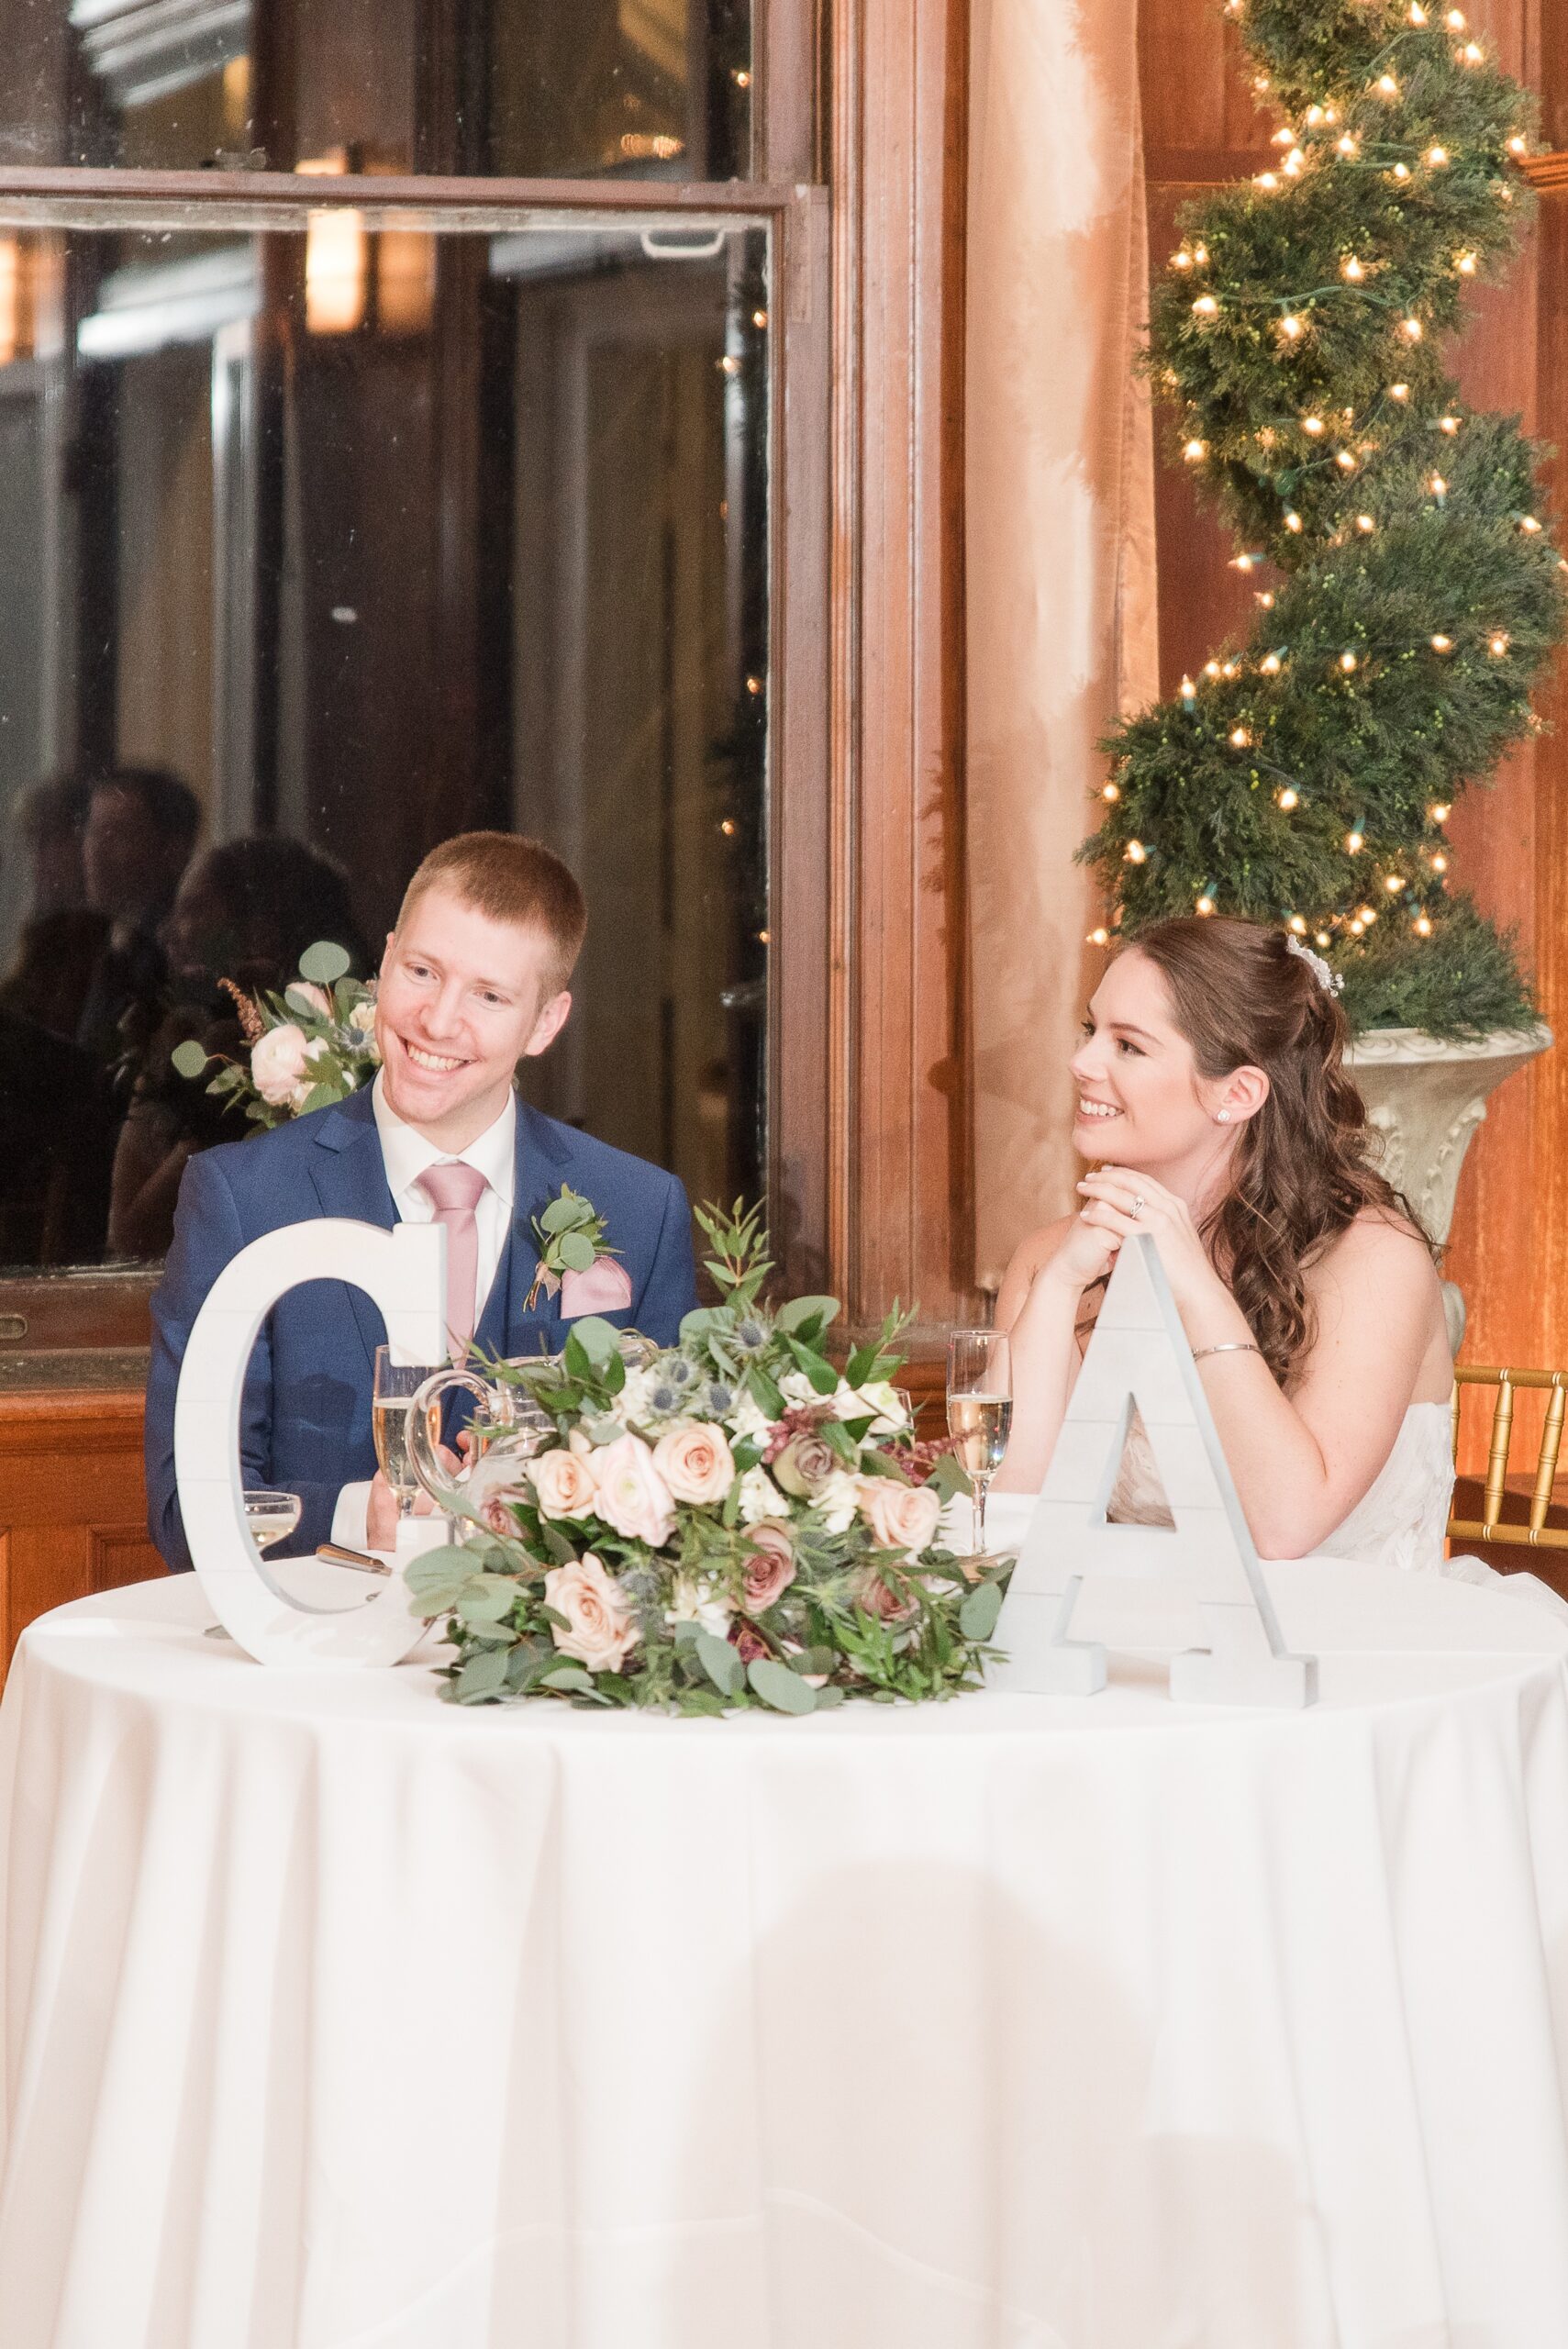 Newlyweds smile big while sitting at their head table